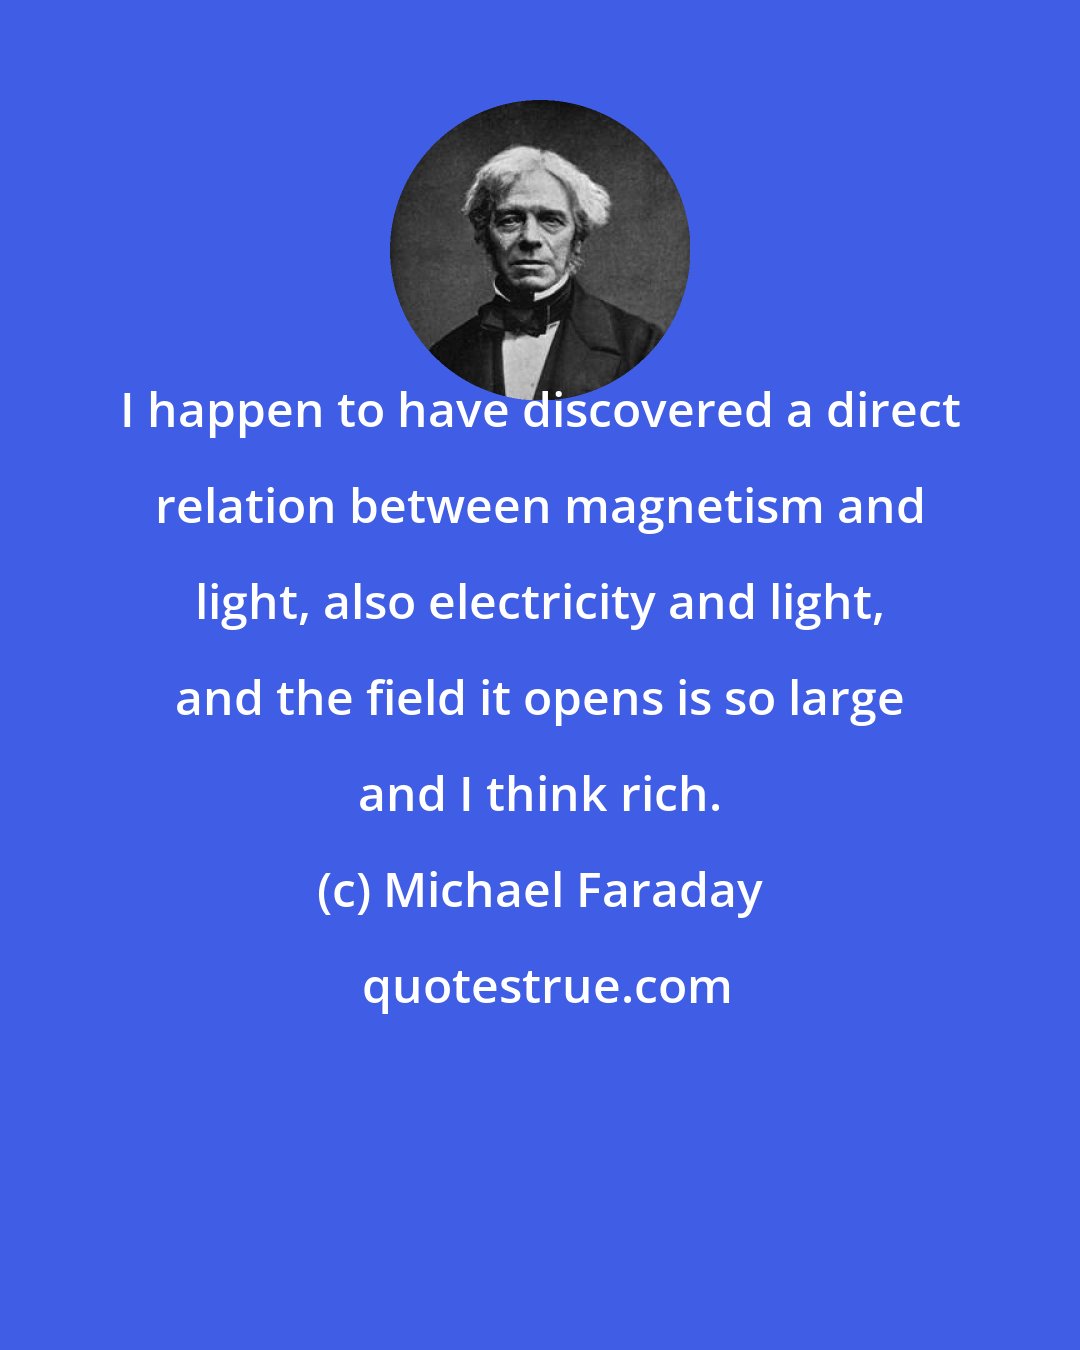 Michael Faraday: I happen to have discovered a direct relation between magnetism and light, also electricity and light, and the field it opens is so large and I think rich.